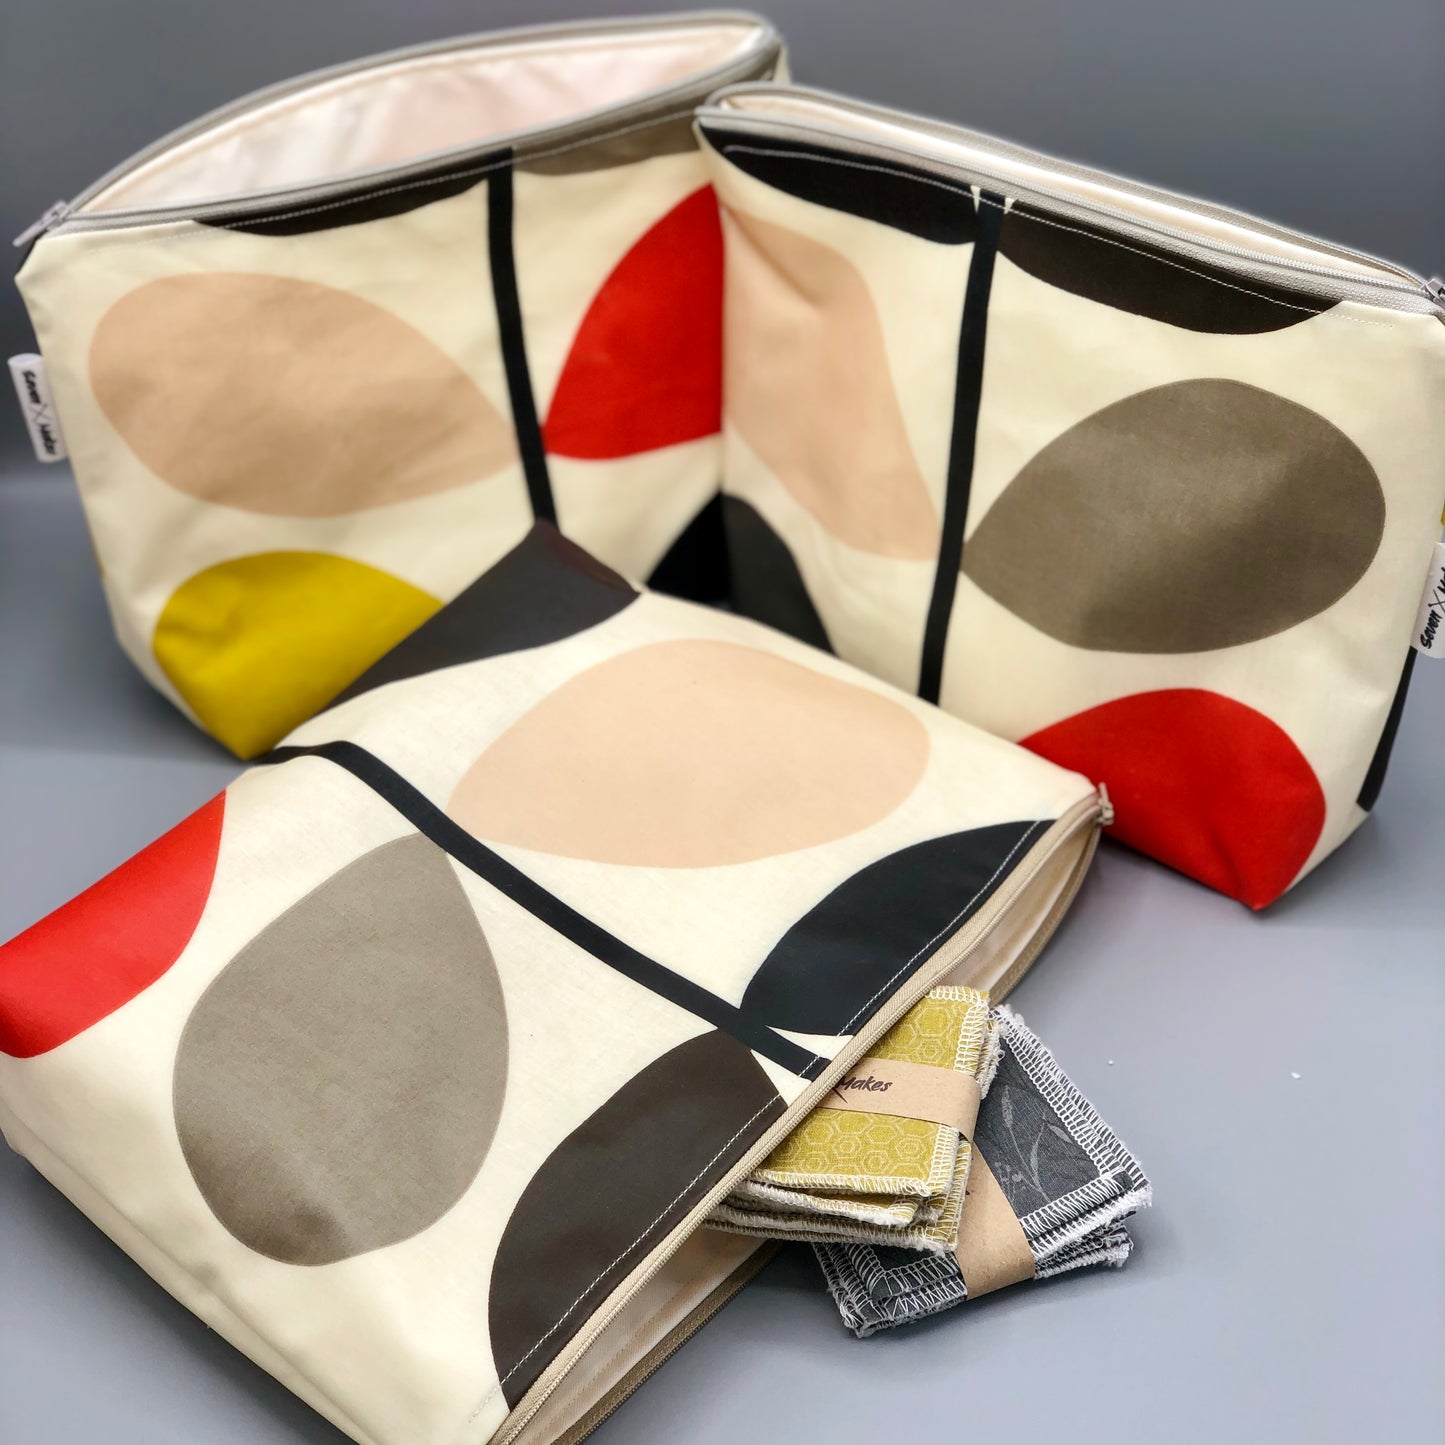 20% off Orla Kiely bags and purses this weekend at Anastasia Boutique! -  Anastasia Boutique